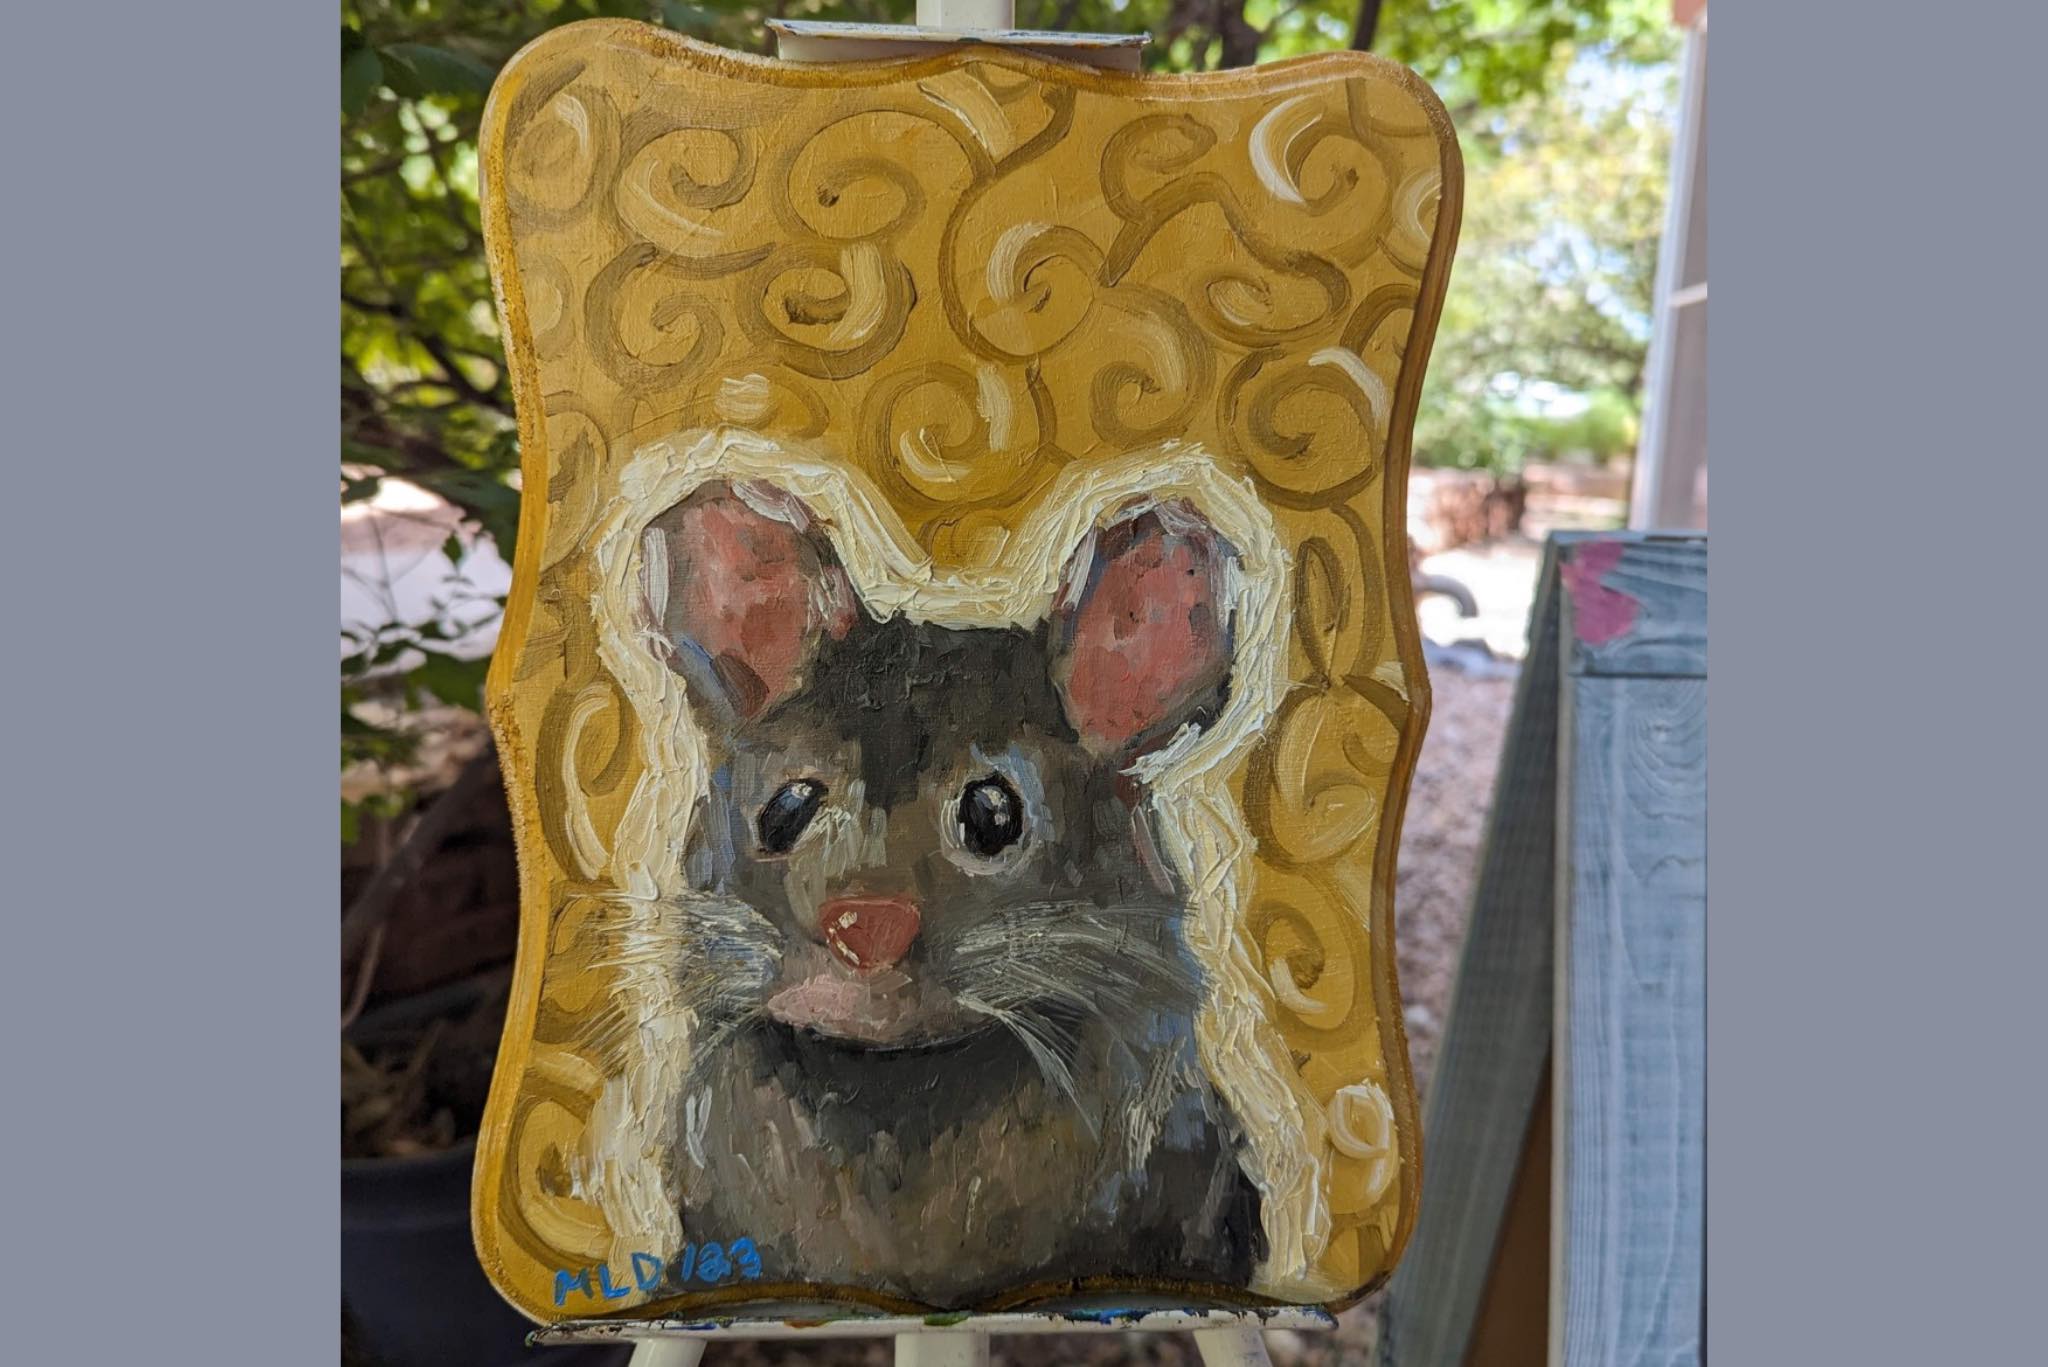 studentg artwork of mouse